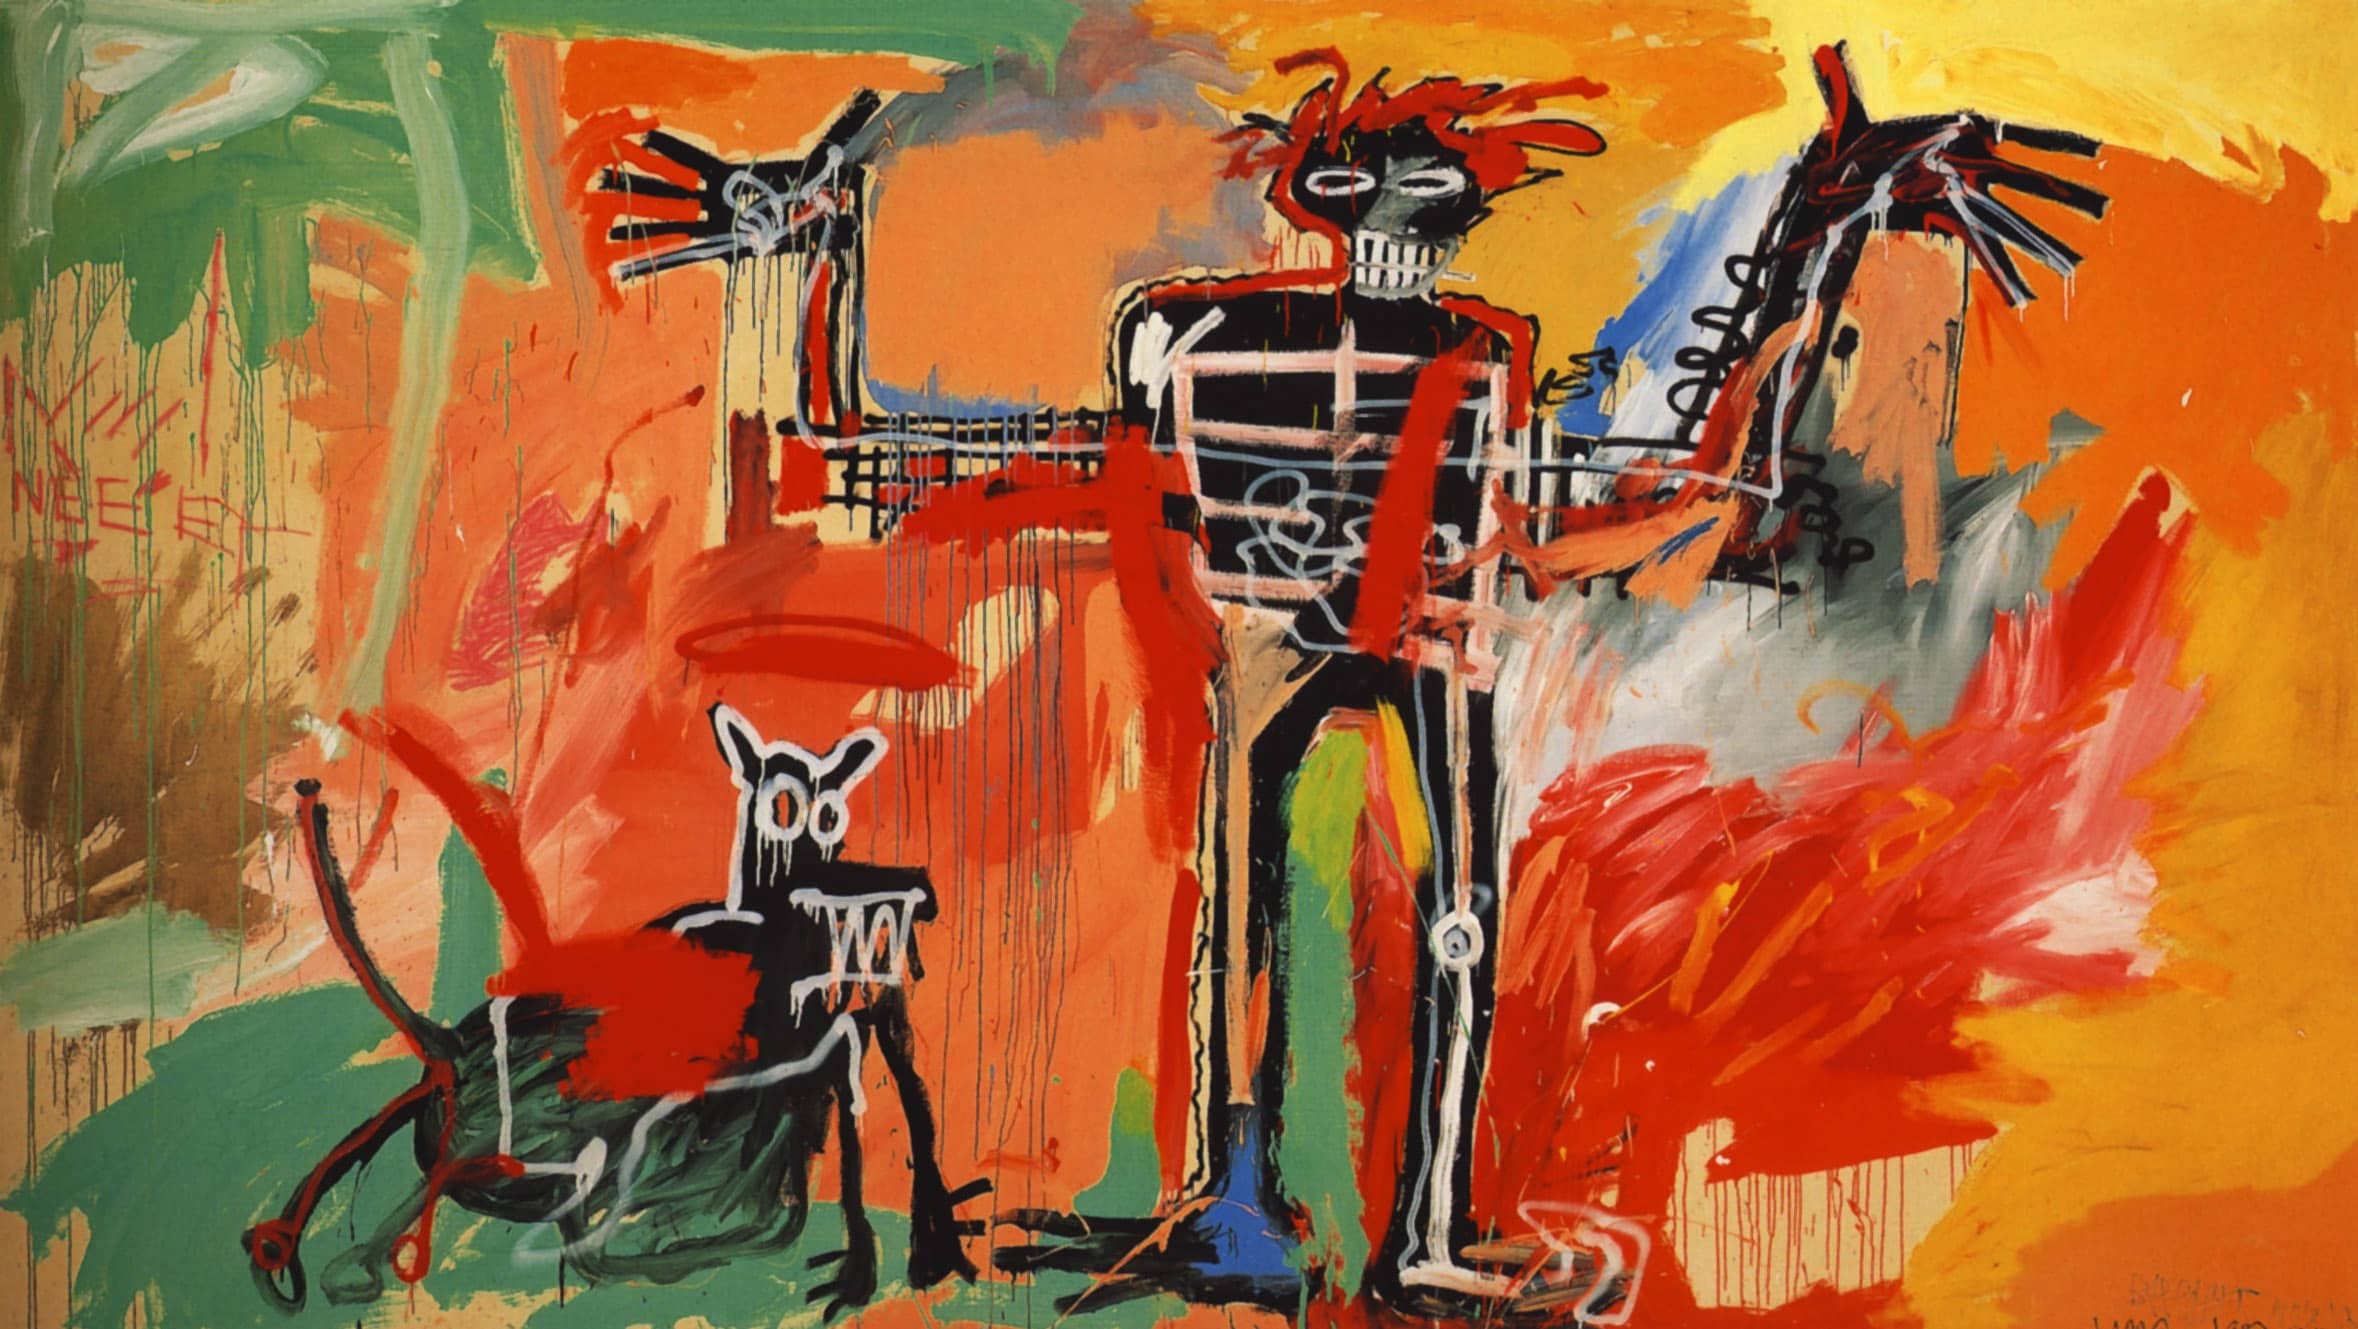 Basquiat Painting Sells for $100 Million